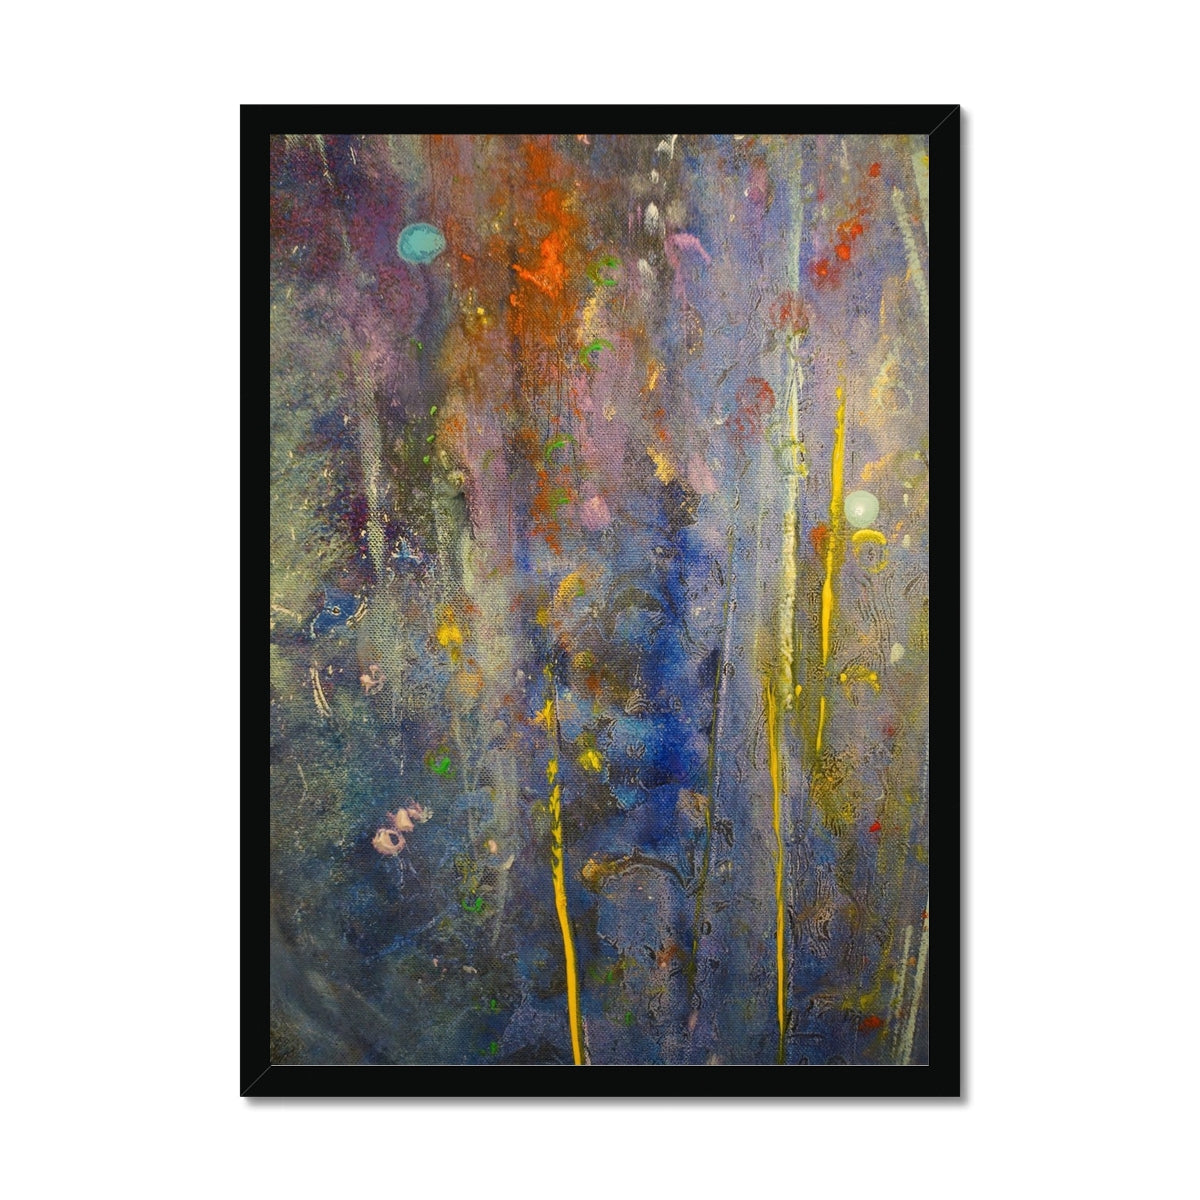 Cairngorms Waterfall Abstract Painting | Framed Prints From Scotland-Framed Prints-Abstract & Impressionistic Art Gallery-A2 Portrait-Black Frame-Paintings, Prints, Homeware, Art Gifts From Scotland By Scottish Artist Kevin Hunter